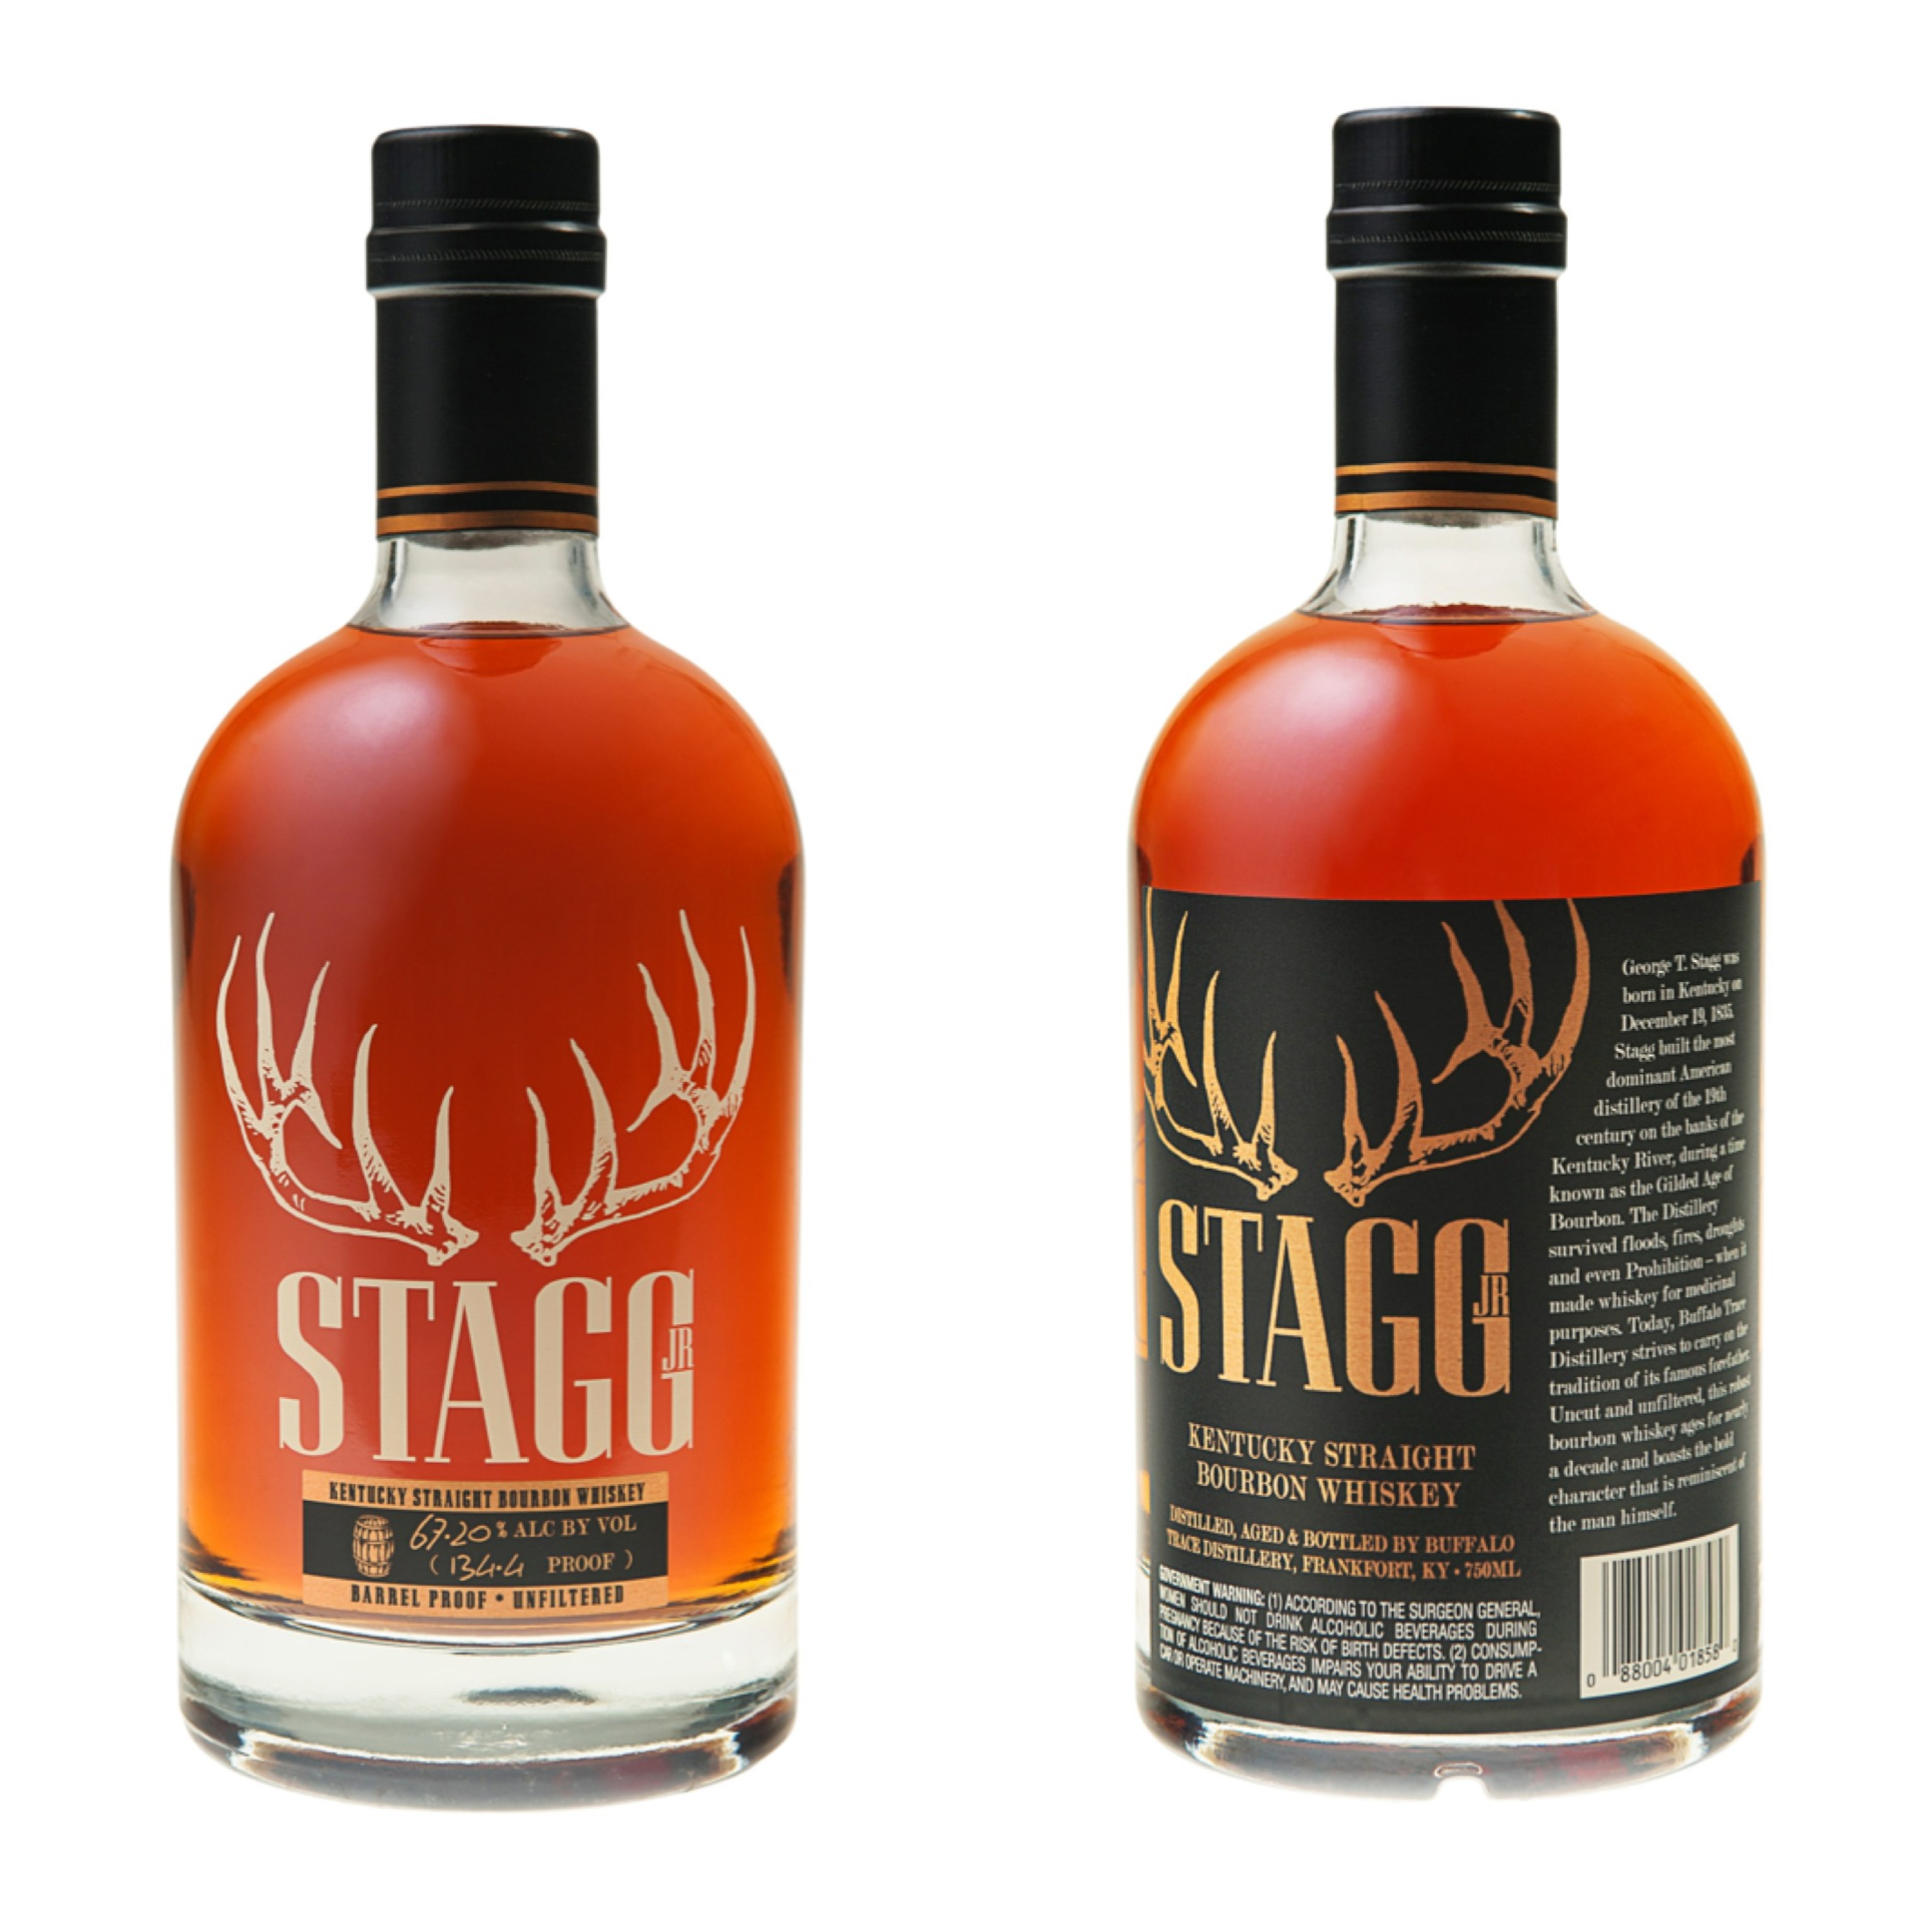 Review #43 – Stagg Jr. Batch #10